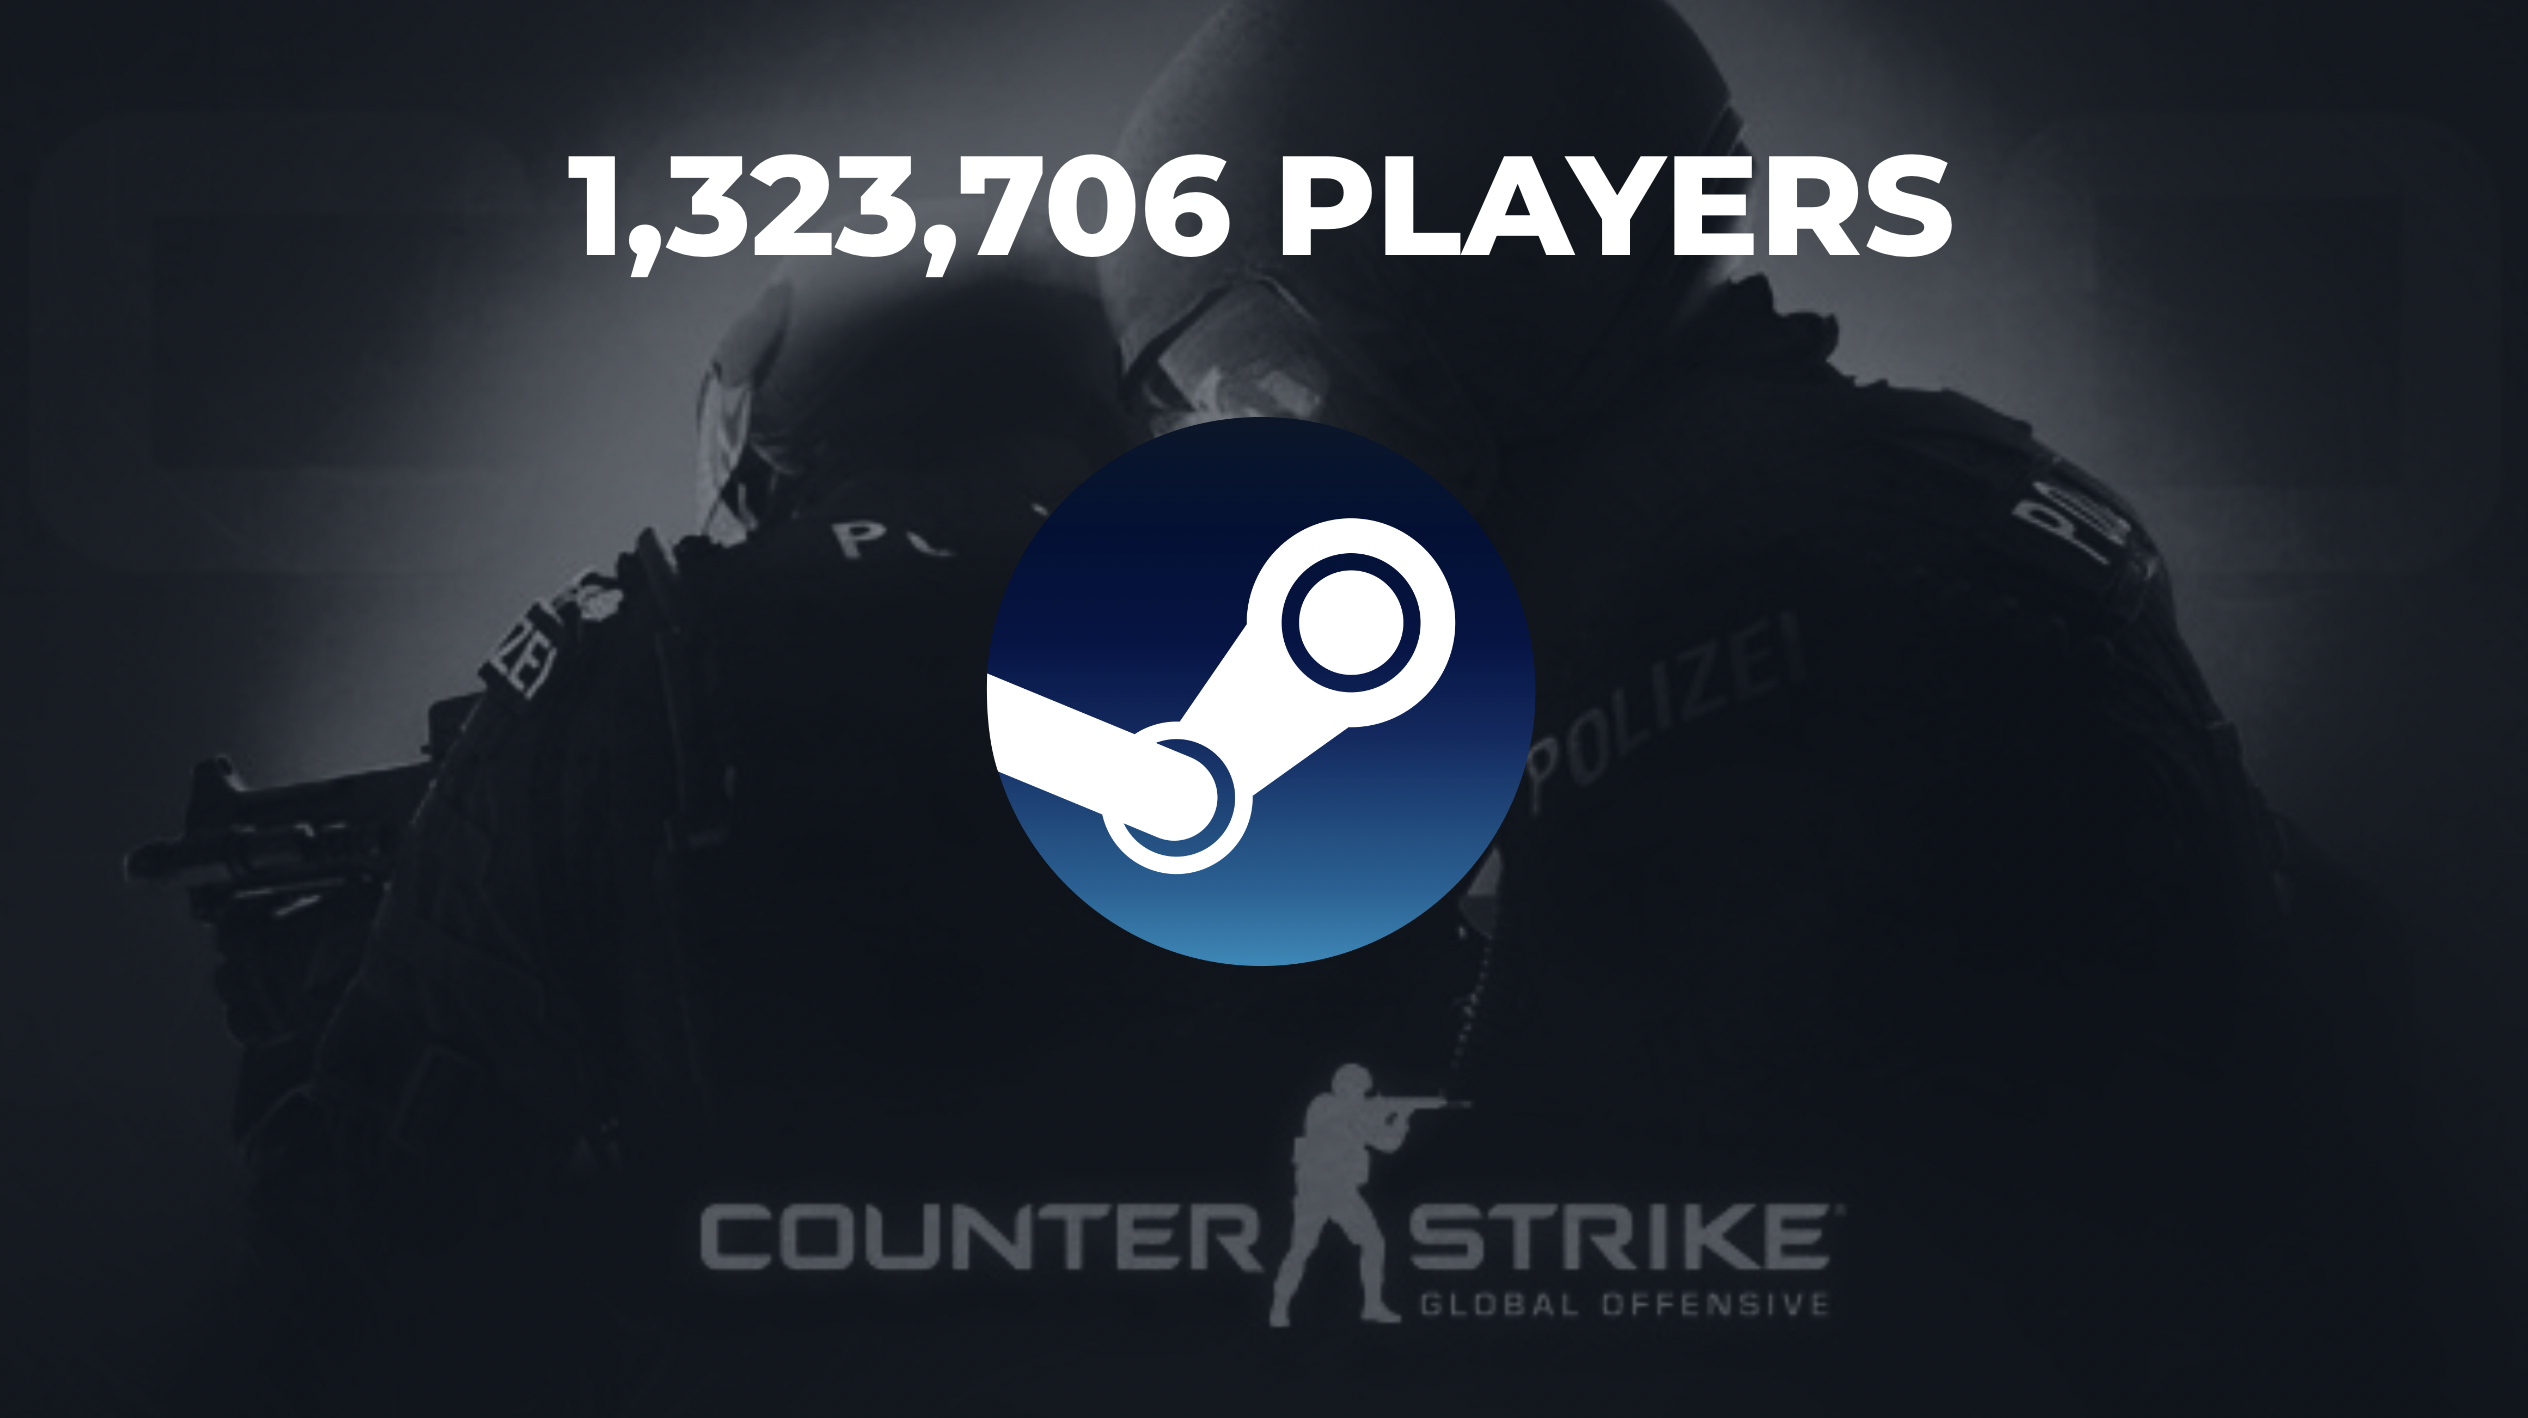 How CSGO Continues to Attract Players and Break Records